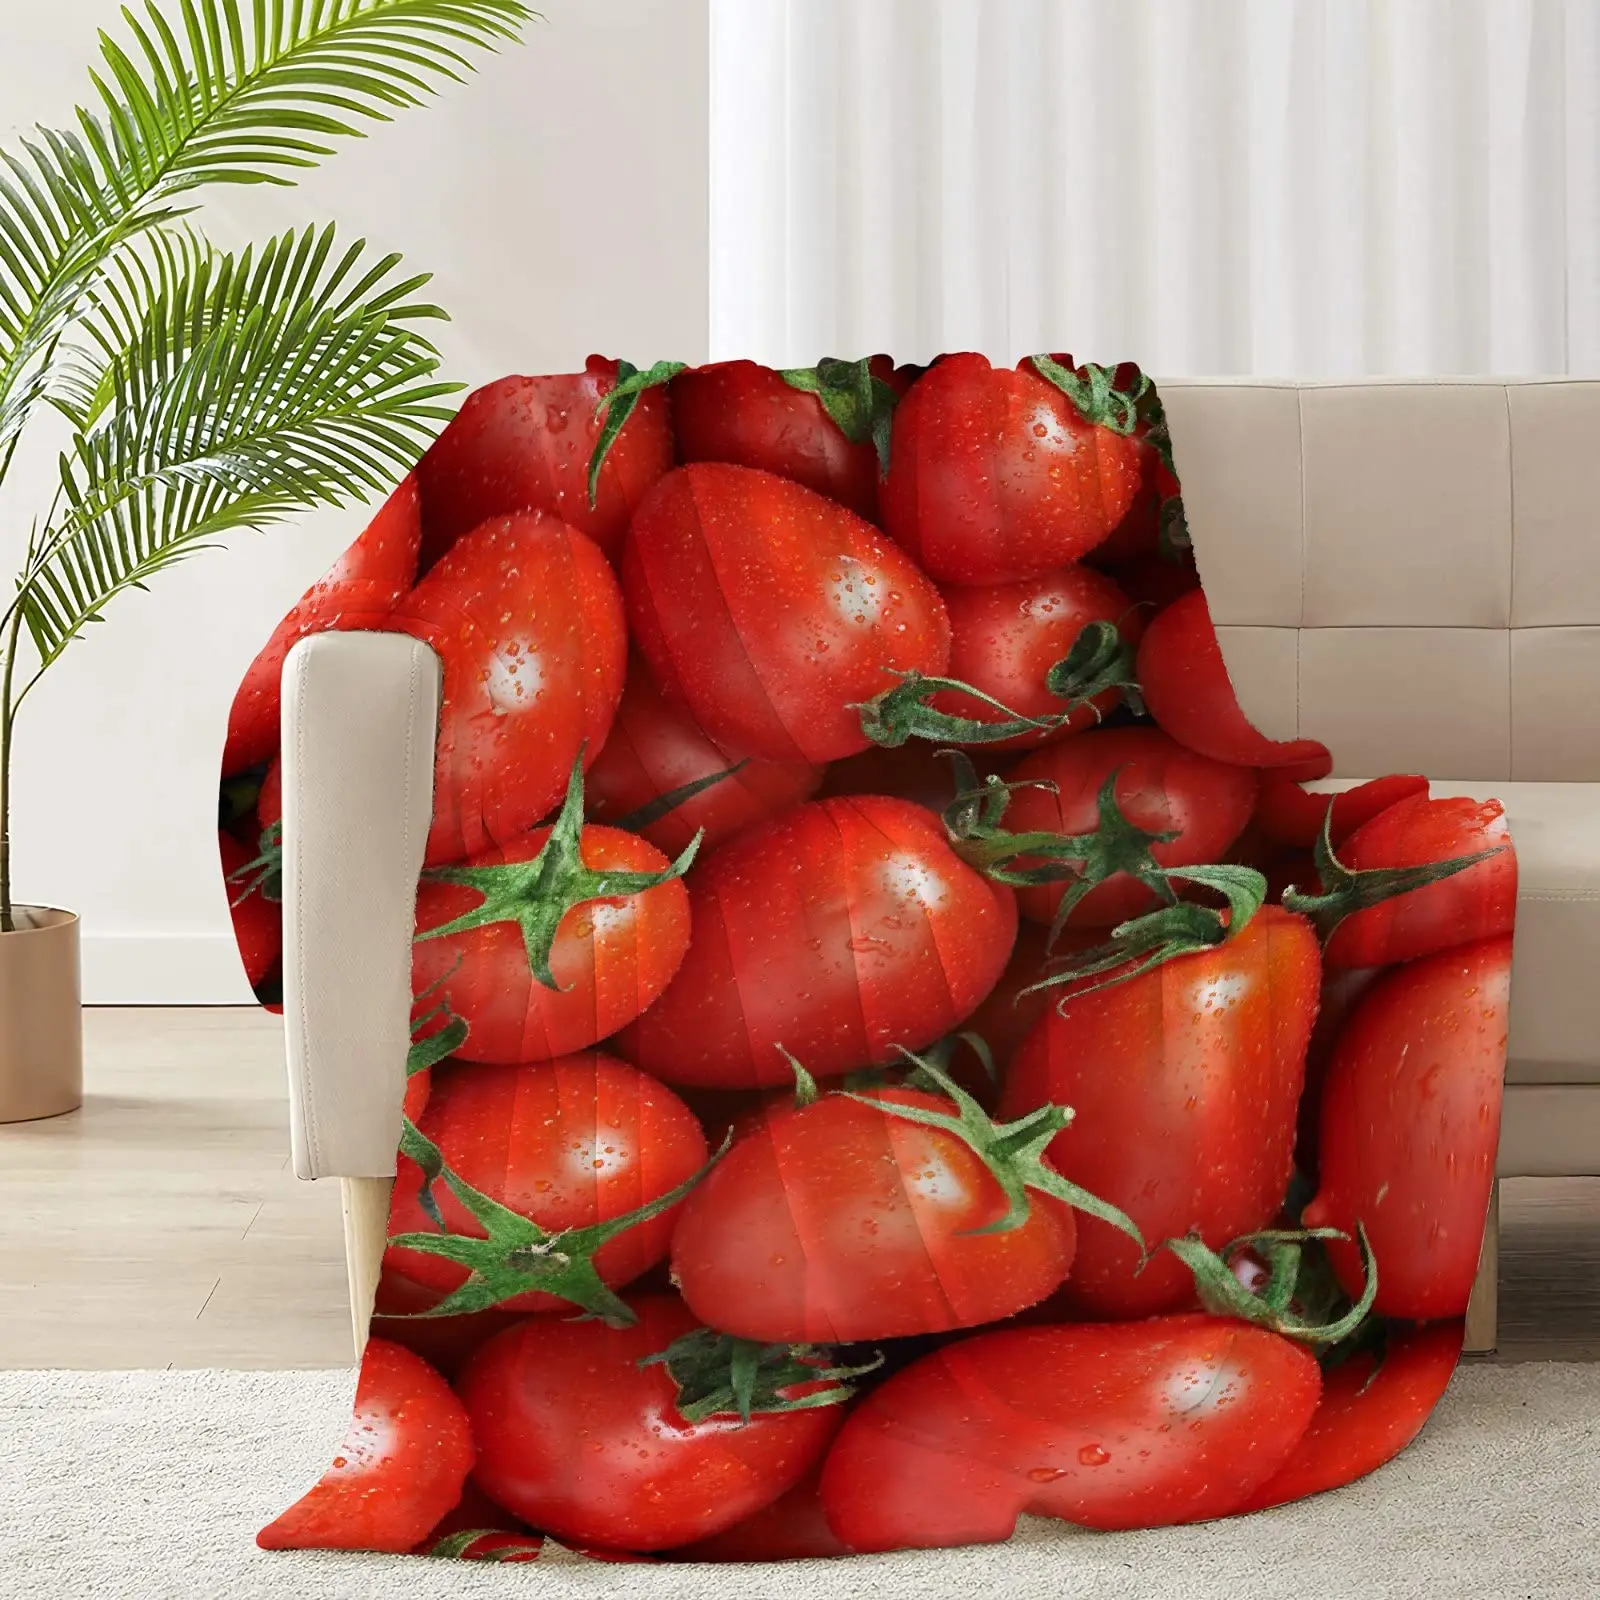 

Throw Blankets Kiwi Tomato Mango Blanket King Queen Size for Living Room Bed Sofa Super Soft Lightweight Fresh Fruits Flannel